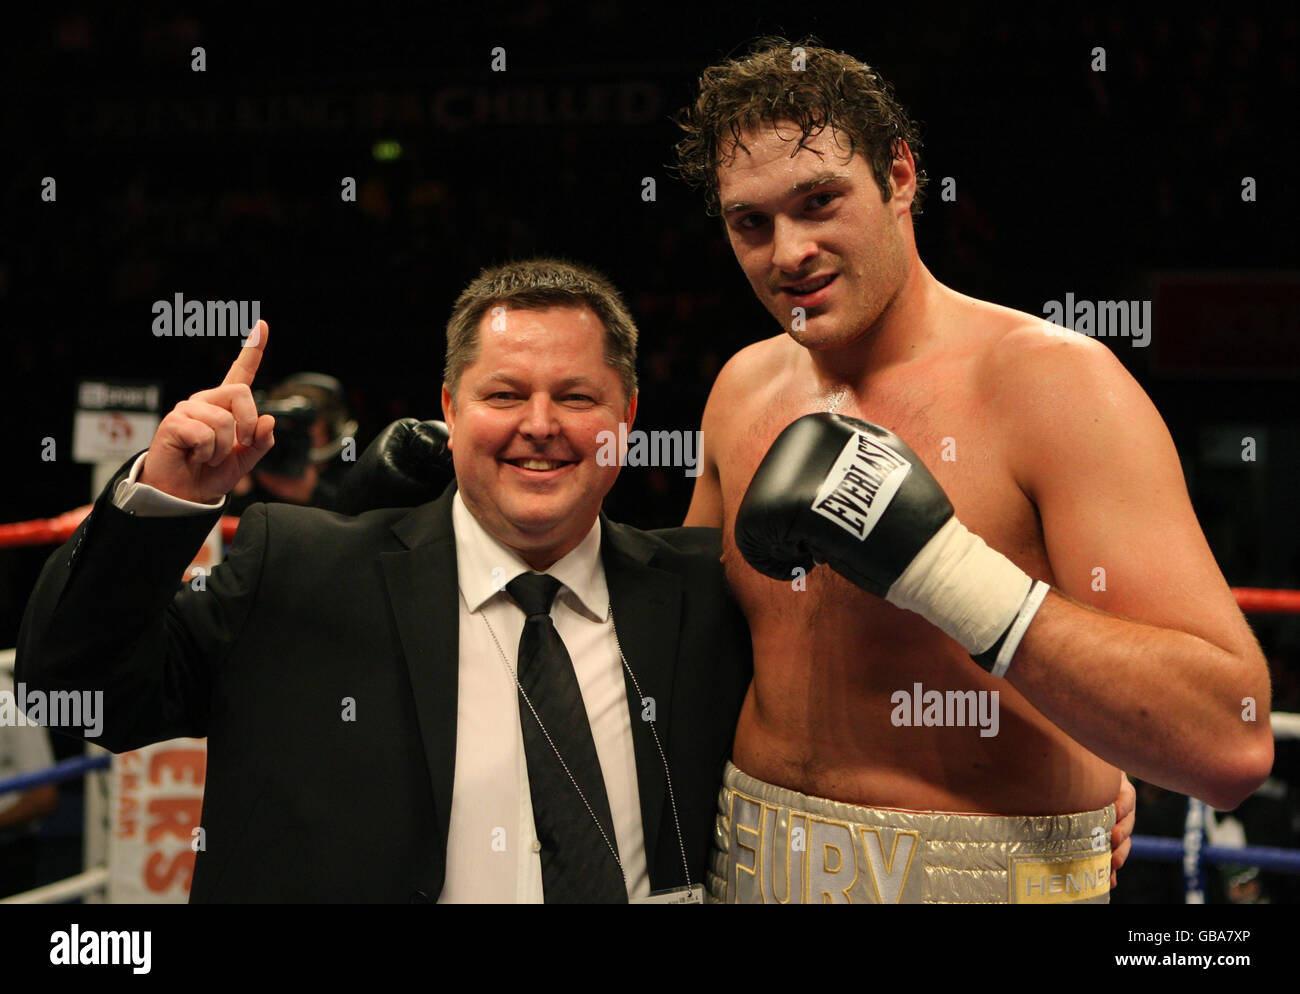 Great Britain's Tyson Fury (right) celebrates victory on his professional debut wth promoter Mick Hennessy after knocking out Hungary's Bela Gyongyosi in the 1st round at the Trent FM Arena, Nottingham. Stock Photo